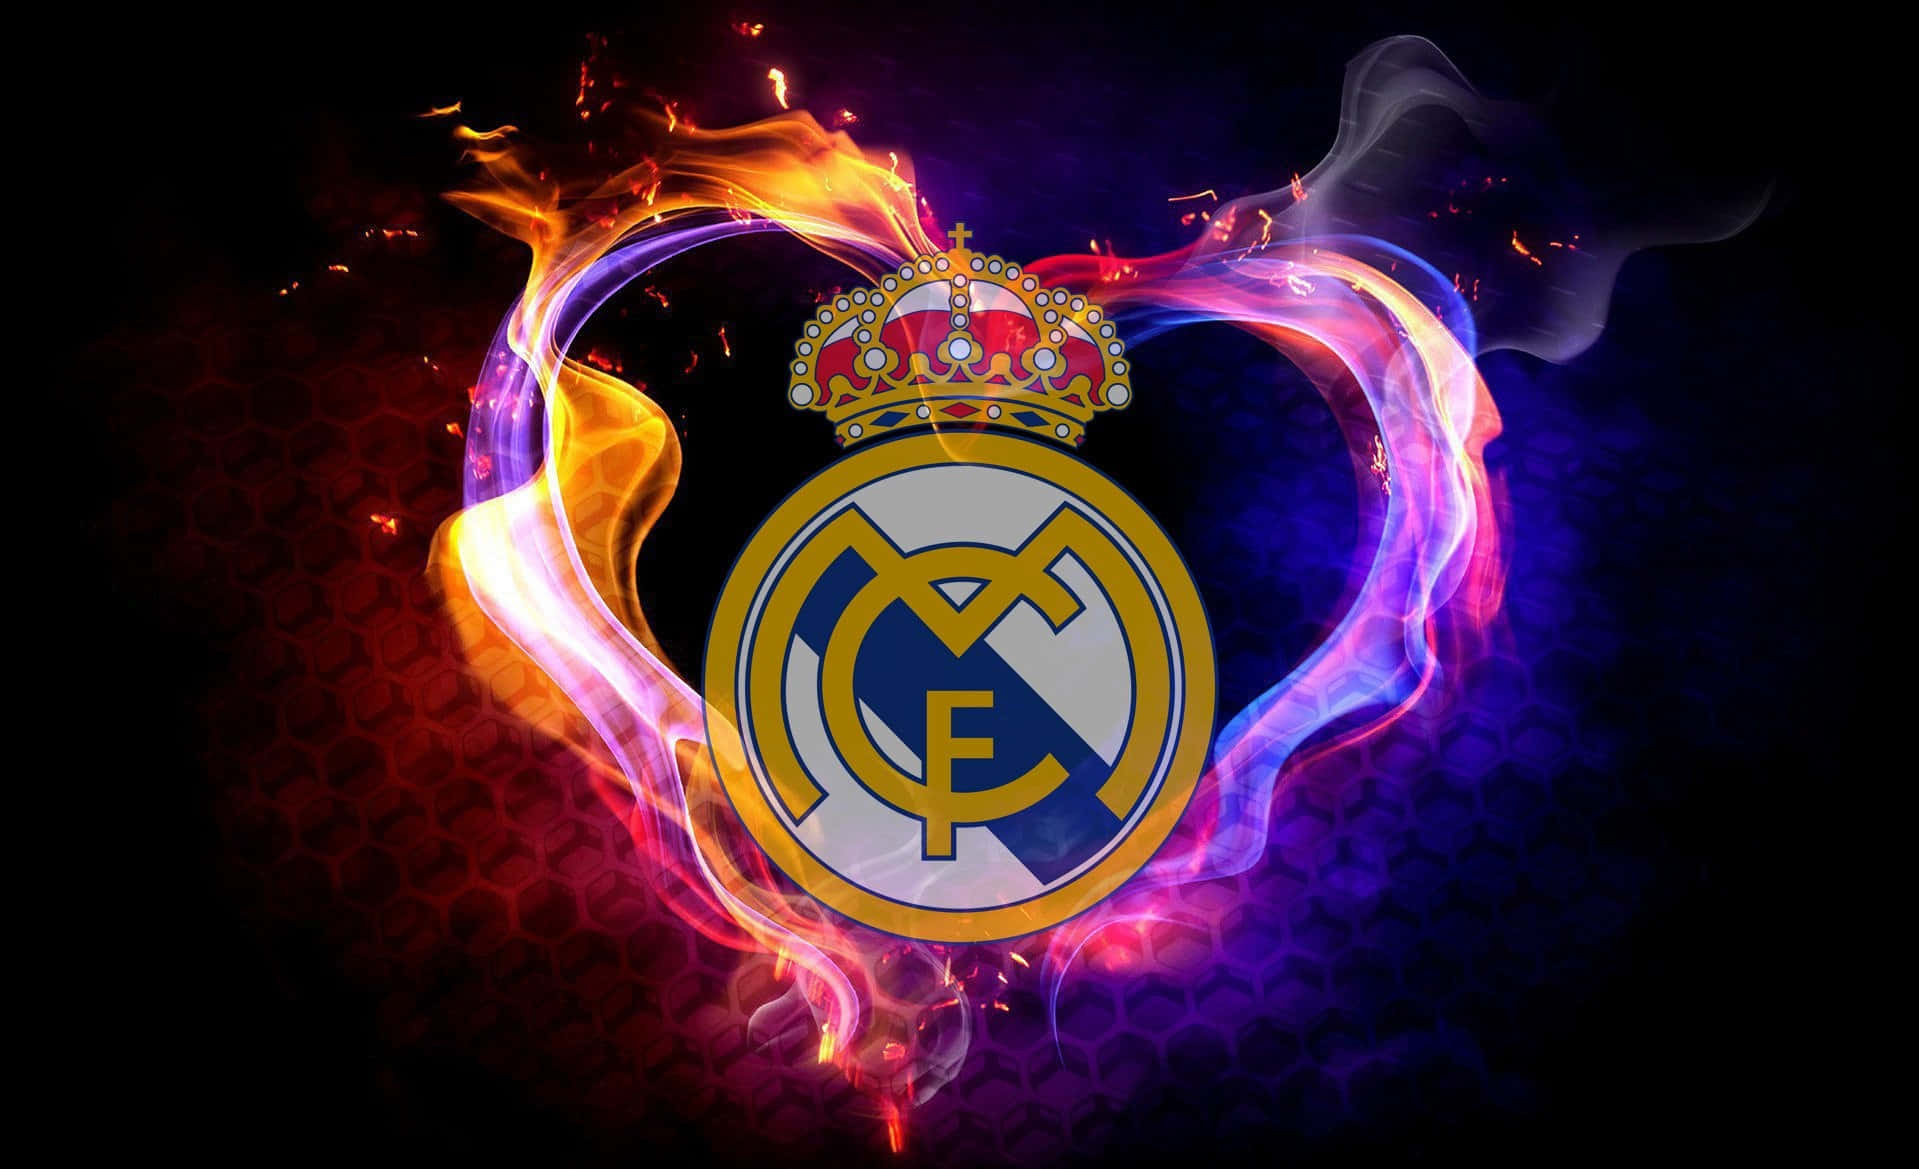 "The Heart Of Real Madrid"